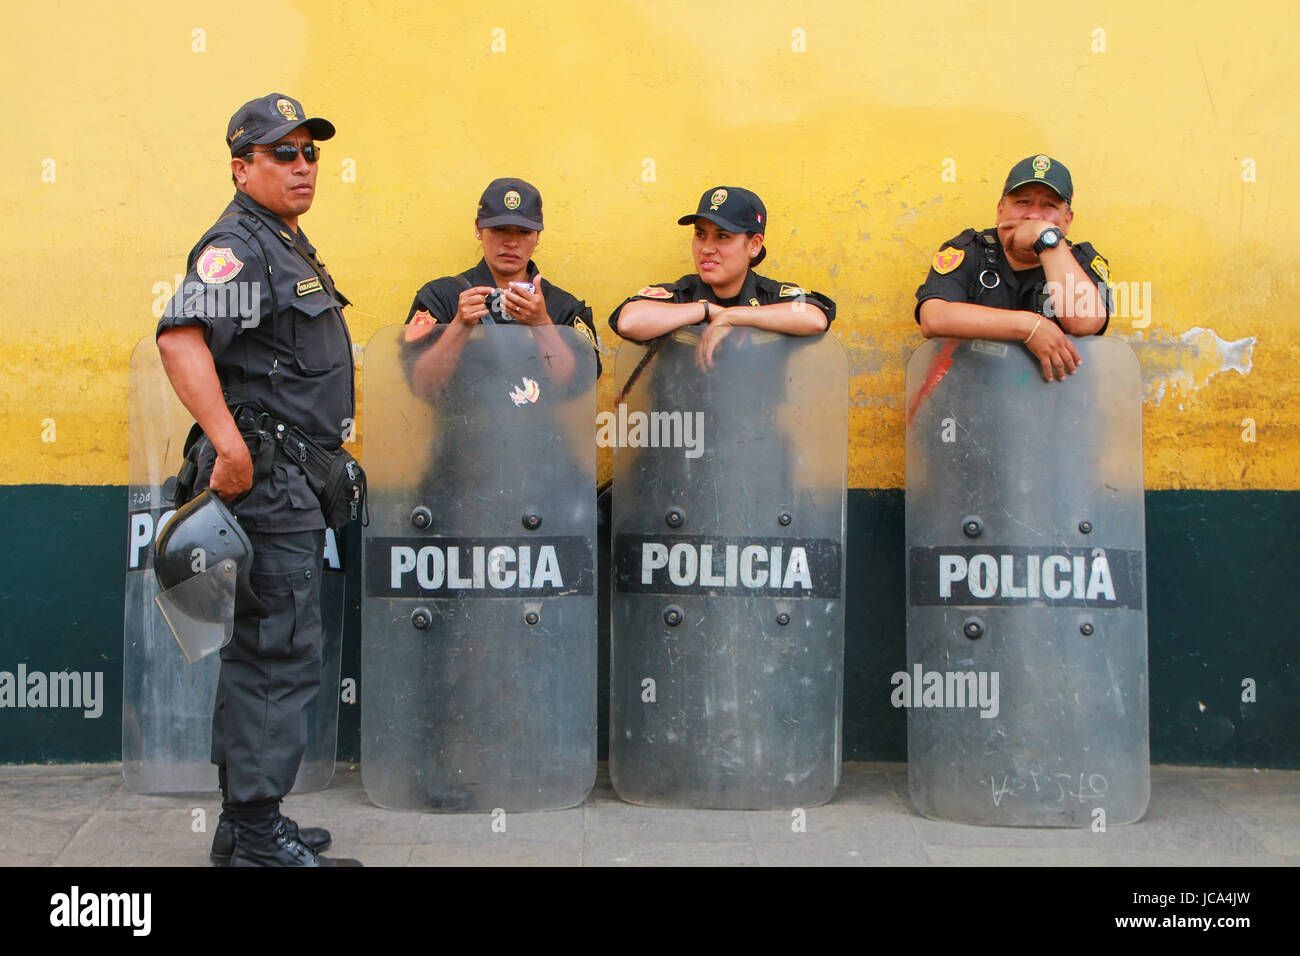 Policemen with riot shields standing by the wall in Lima, Peru. Peruvian National Police is one of the largest police forces in South America. Stock Photo